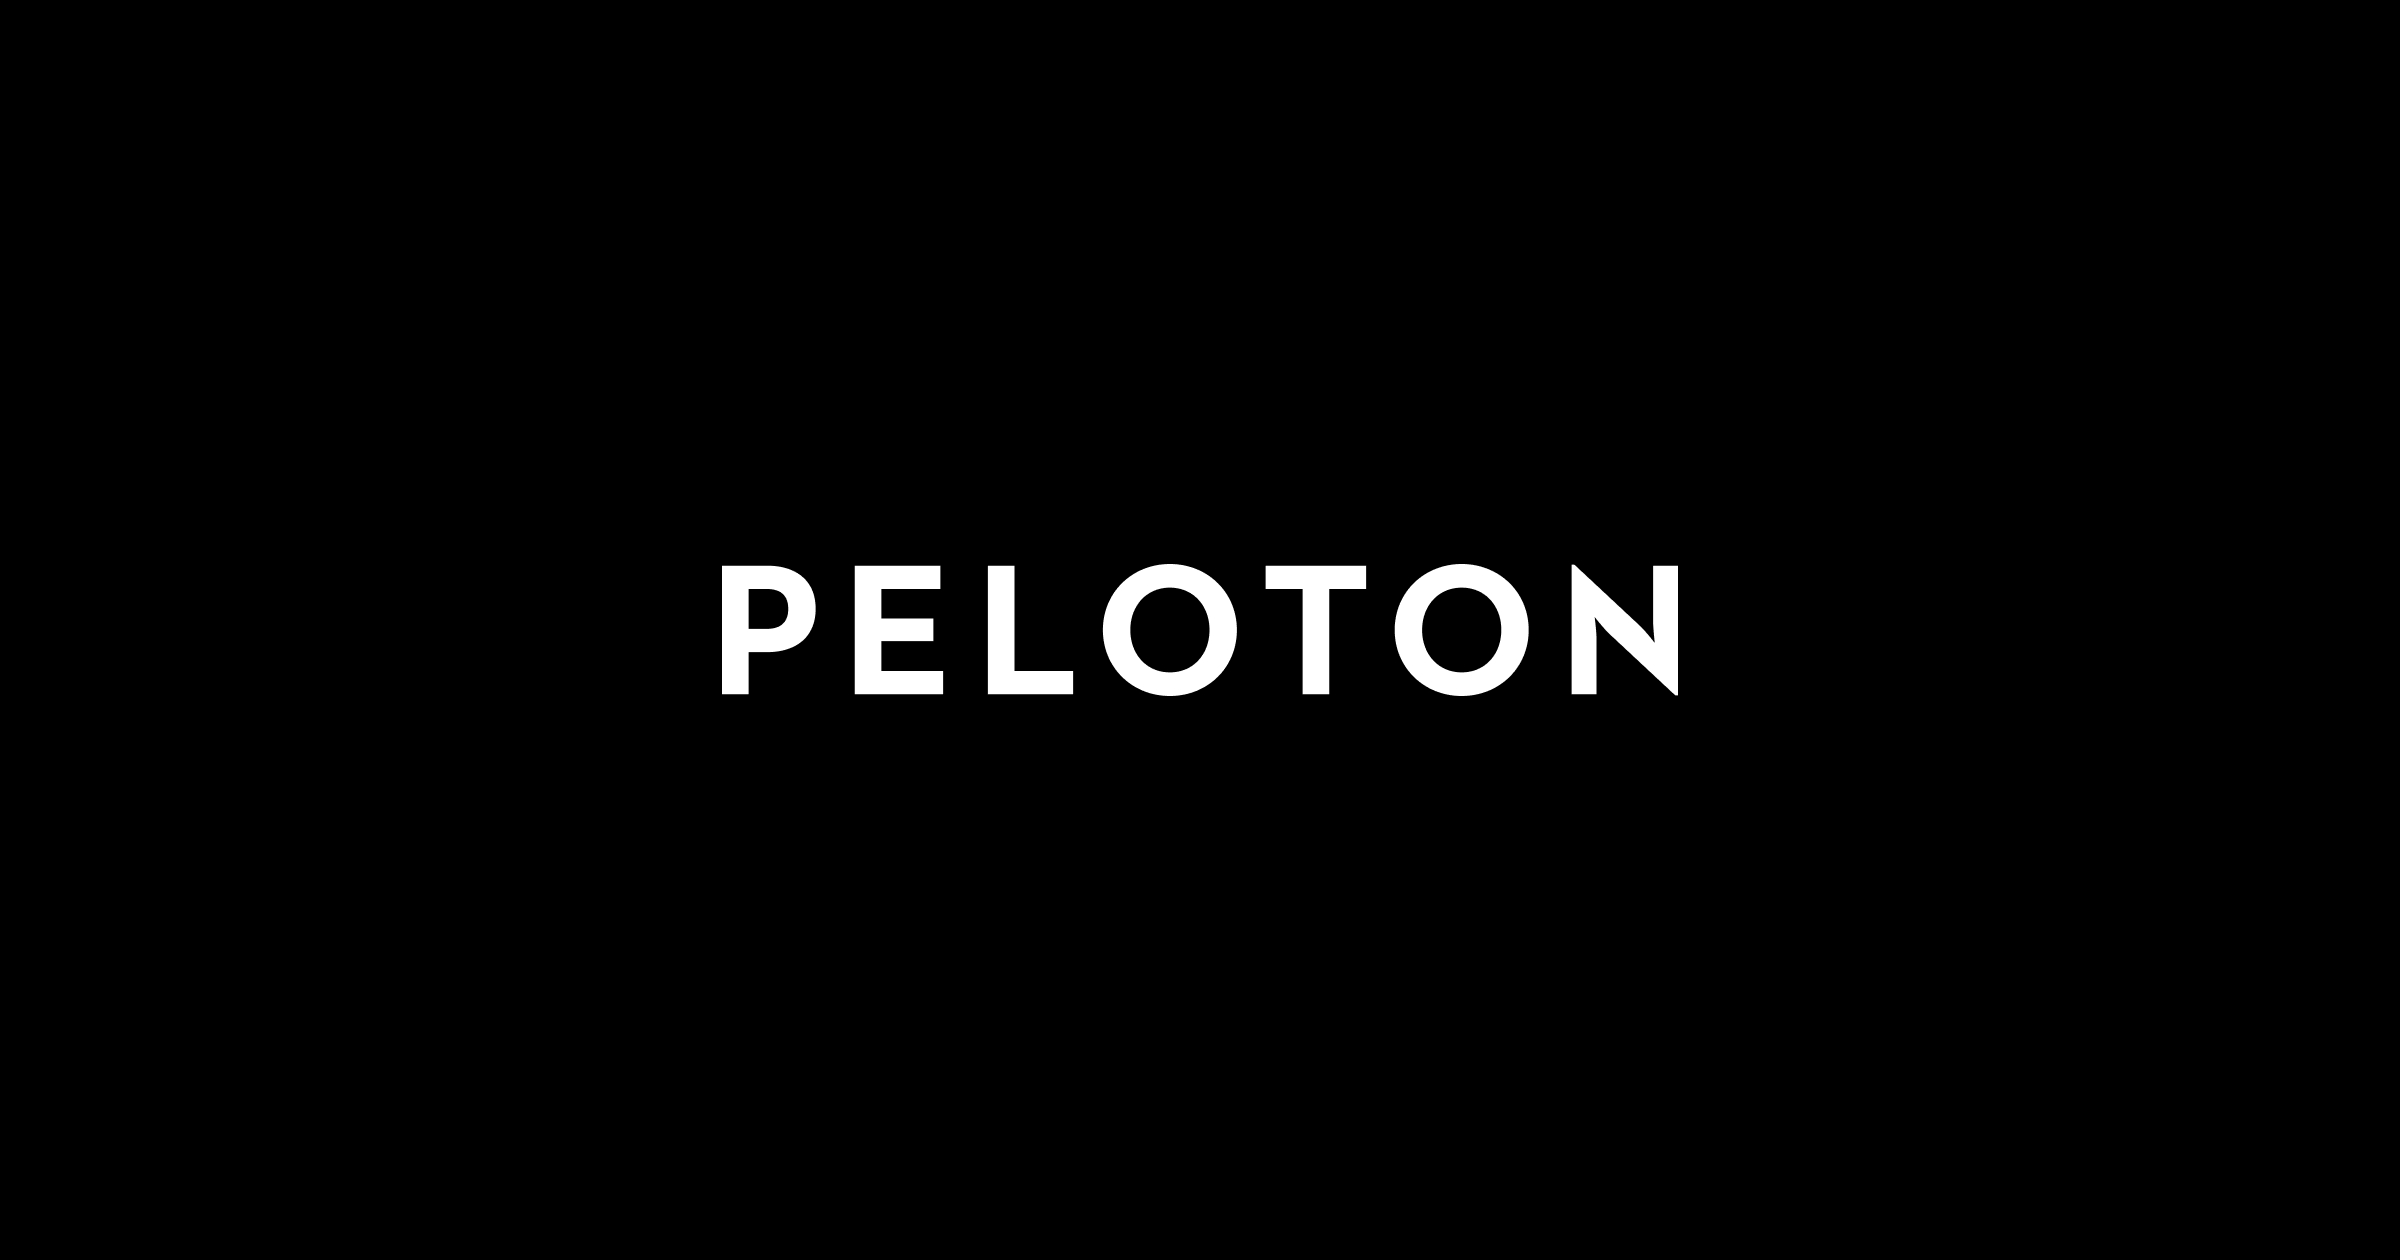 Peloton: The ultimate fitness experience